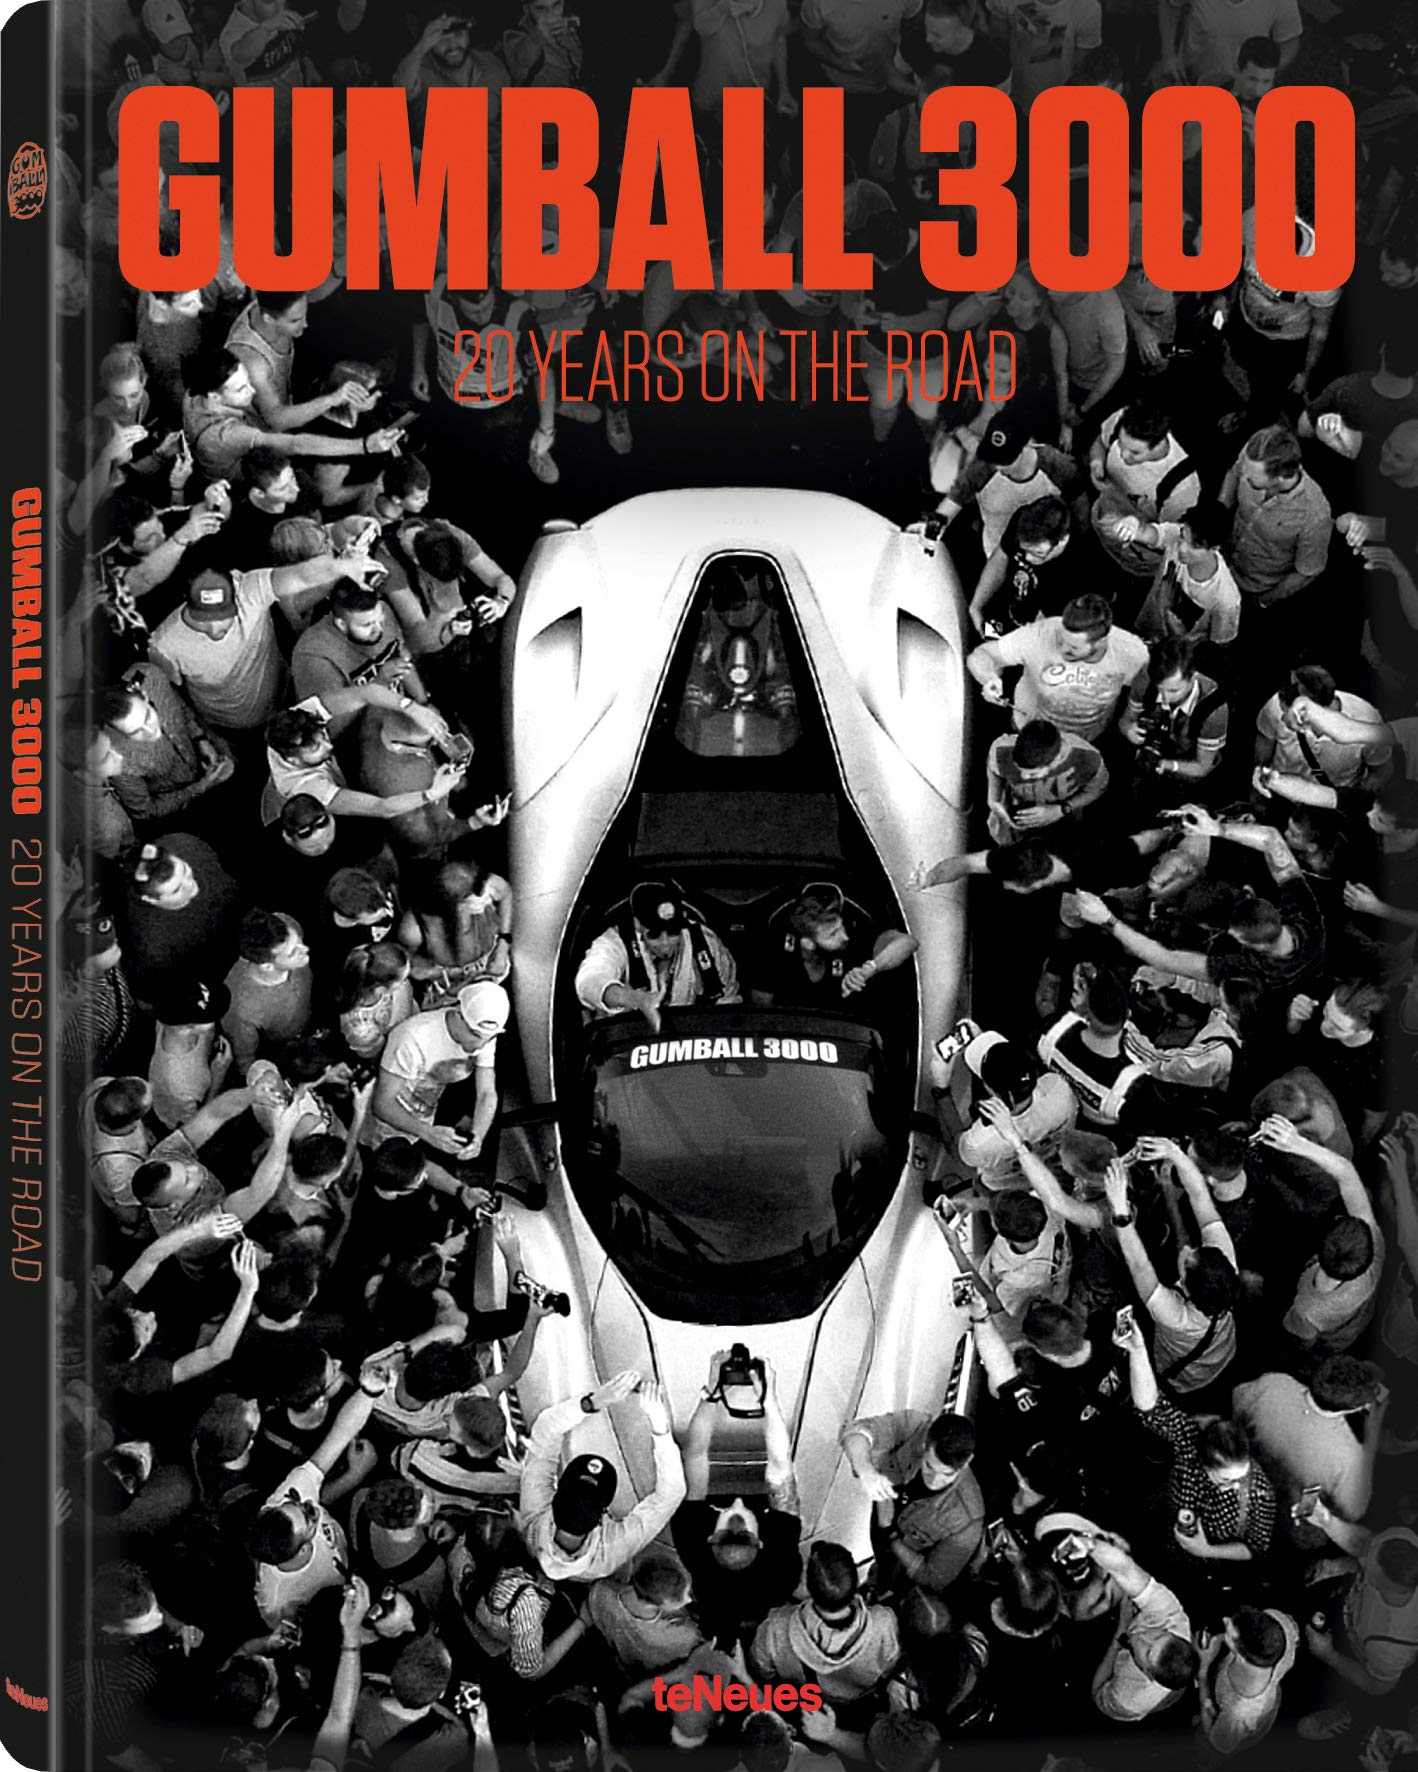 Gumball 3000 book cover